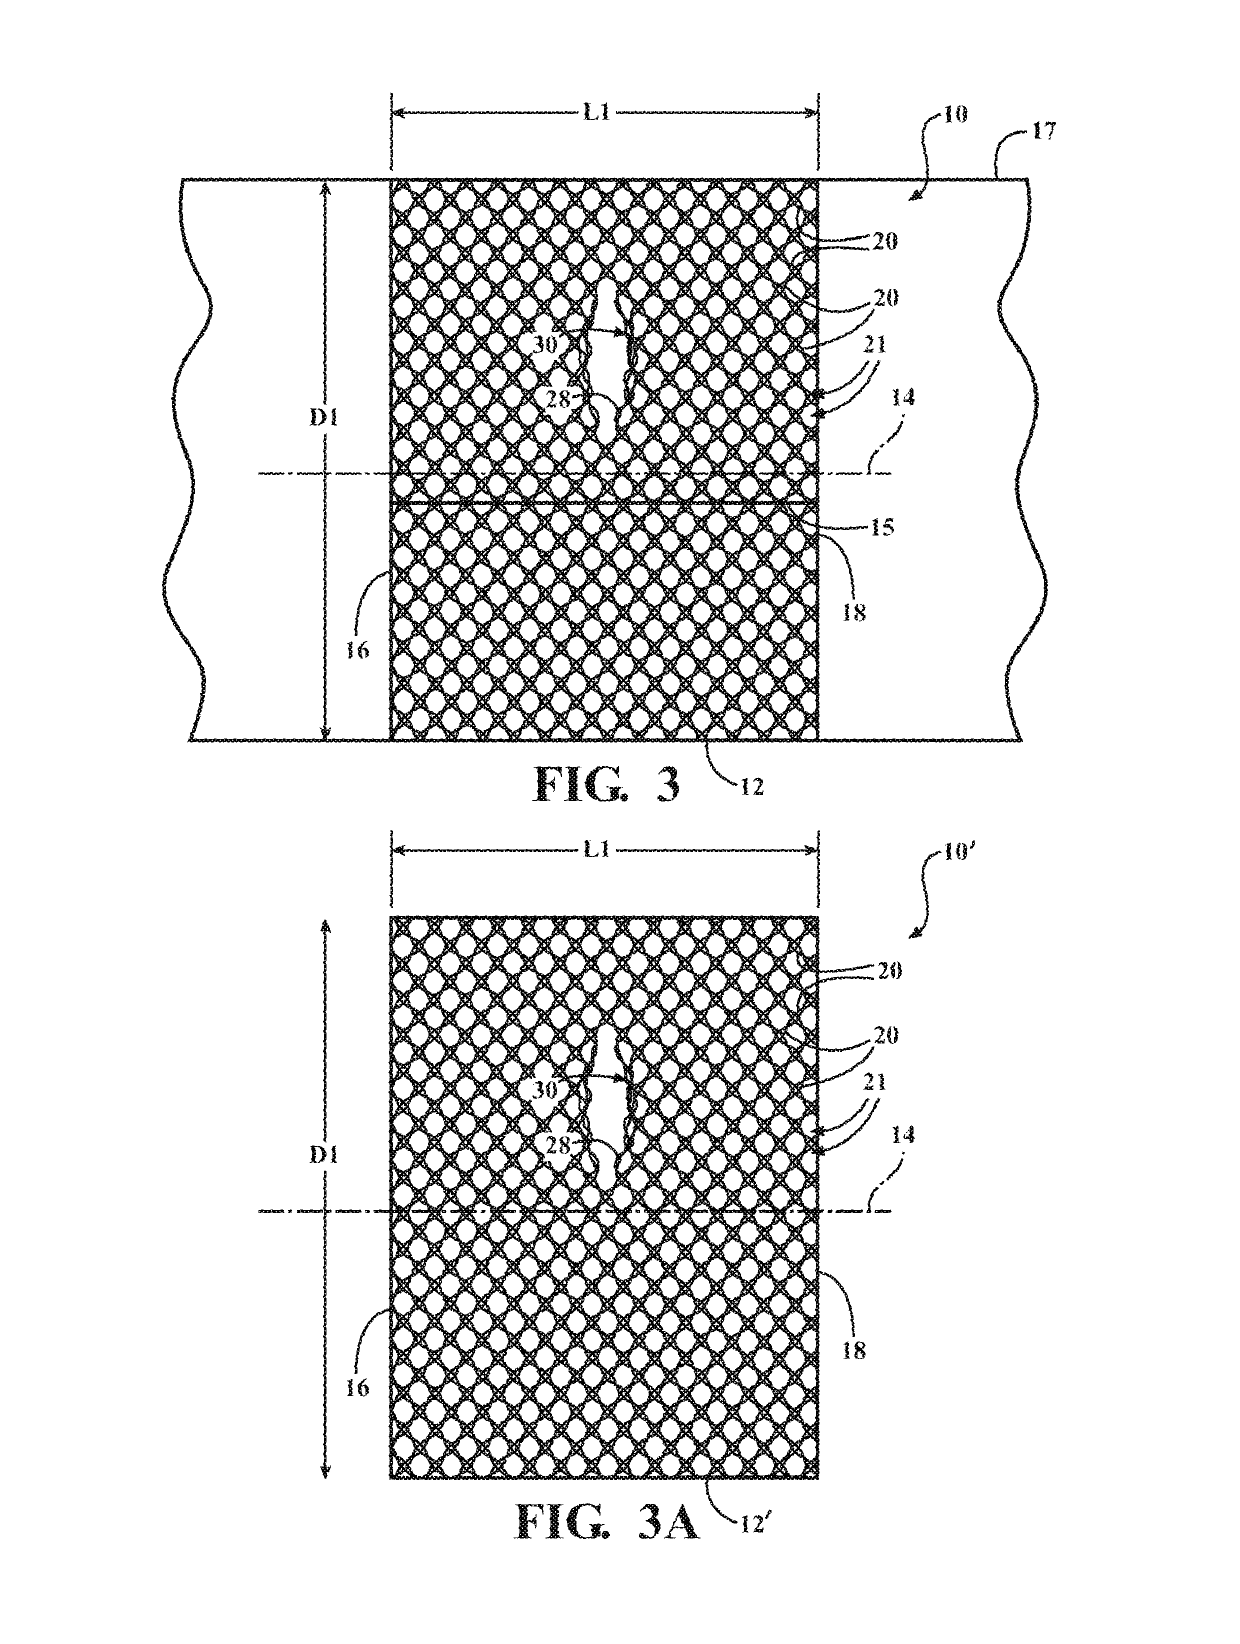 Braided textile sleeve with integrated opening and self-sustaining expanded and contracted states and method of construction thereof